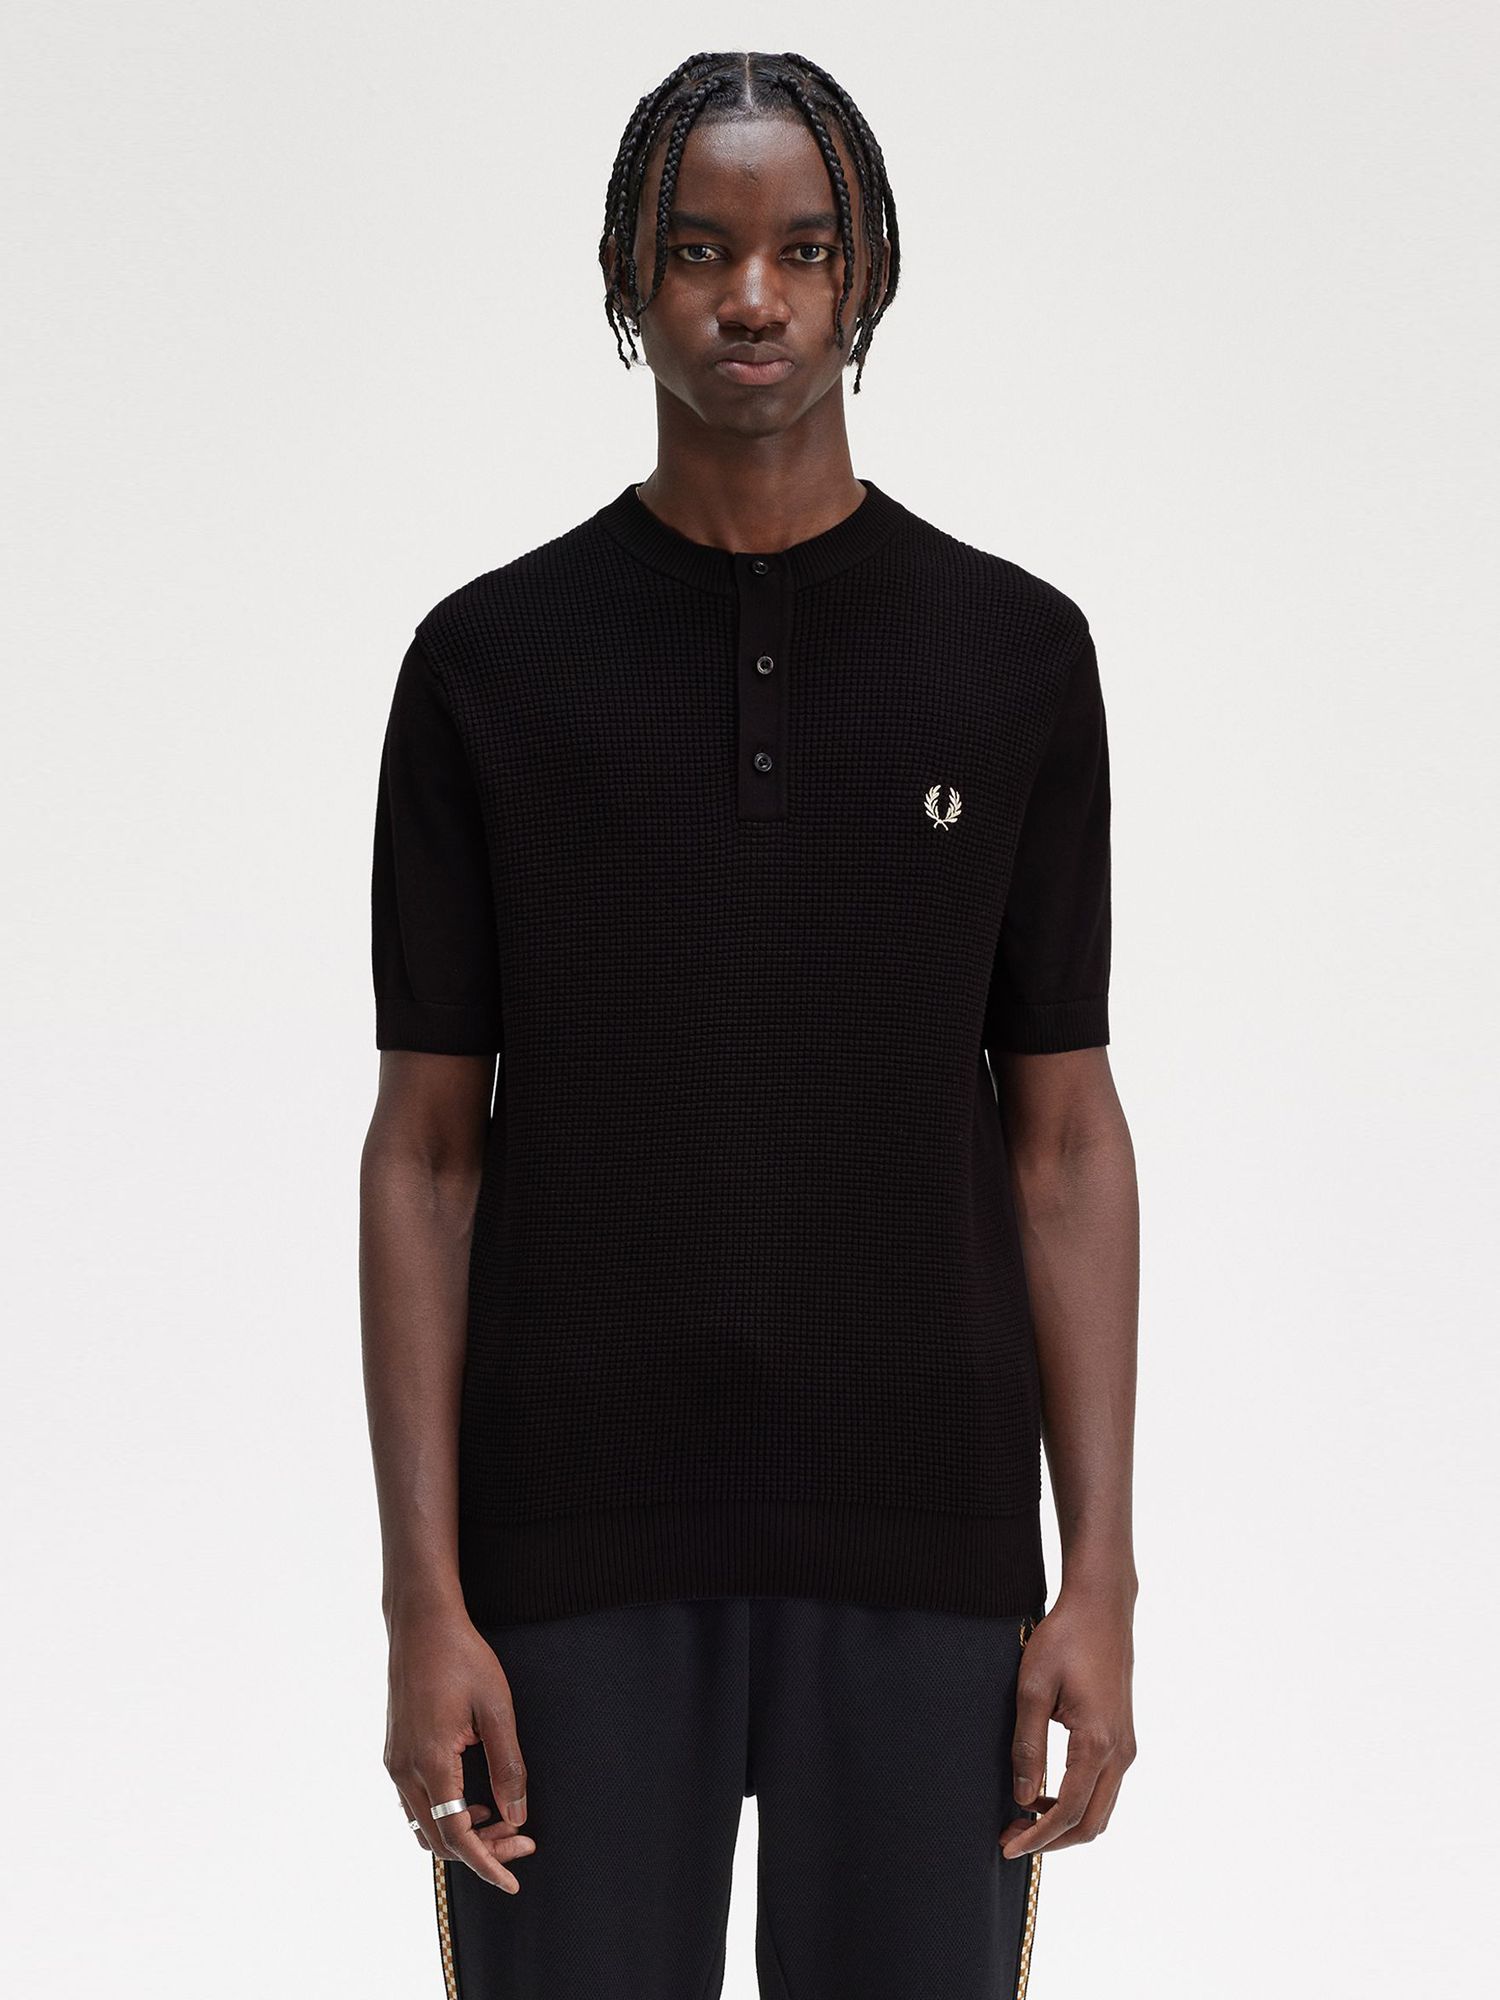 Fred Perry Waffled Textured Knit Henley Top, Black, S